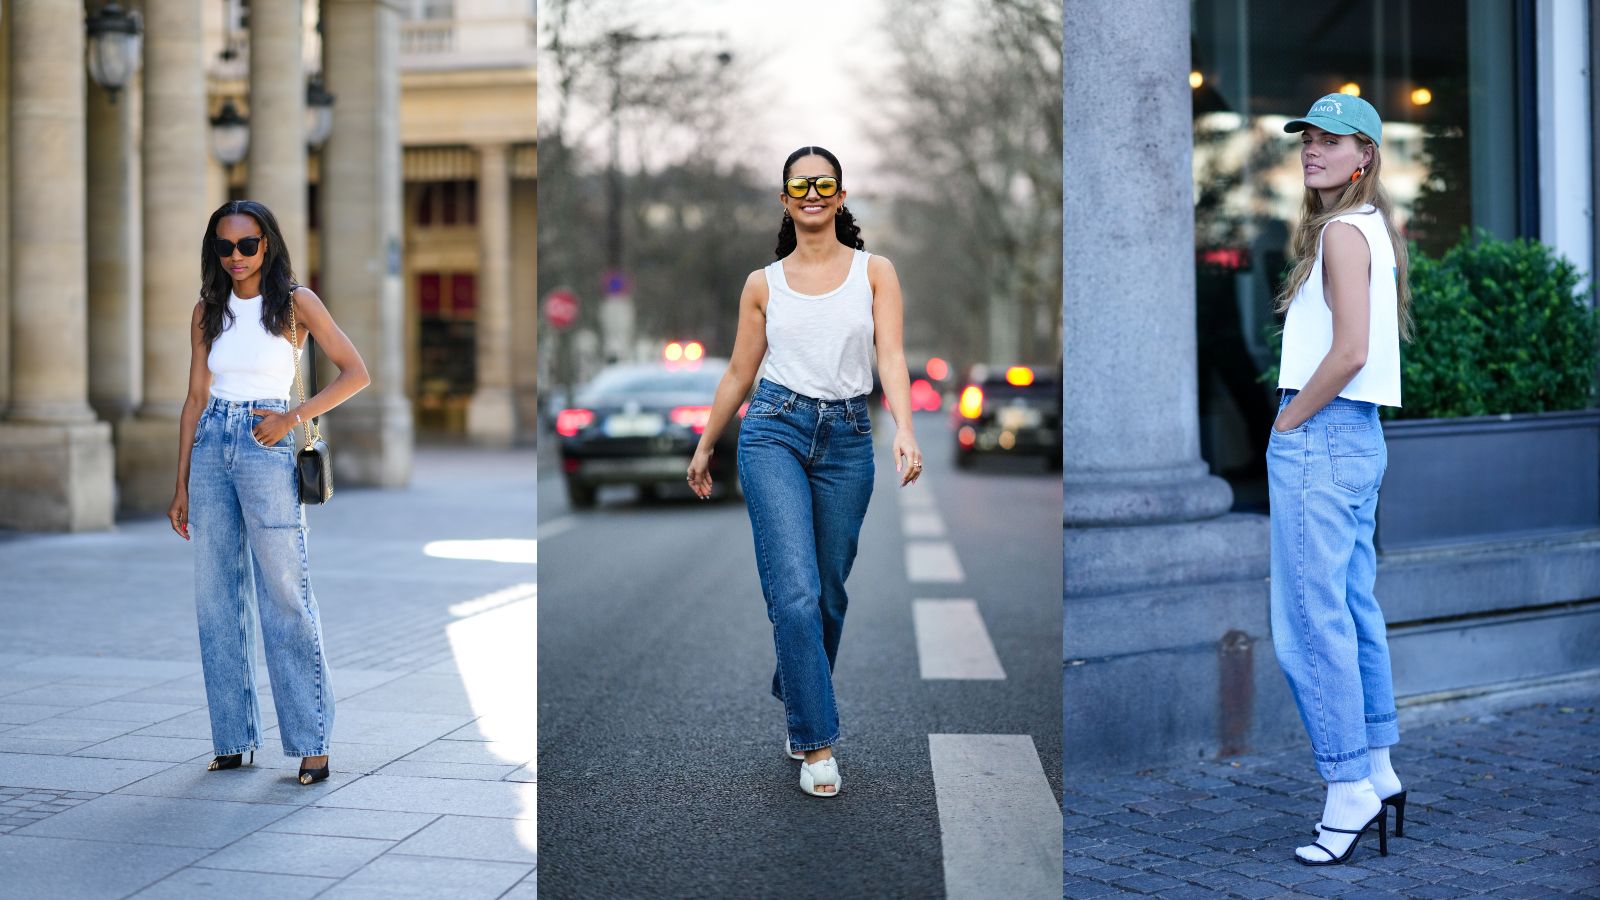 How to style baggy jeans: 8 cool weekend outfit ideas | Woman & Home